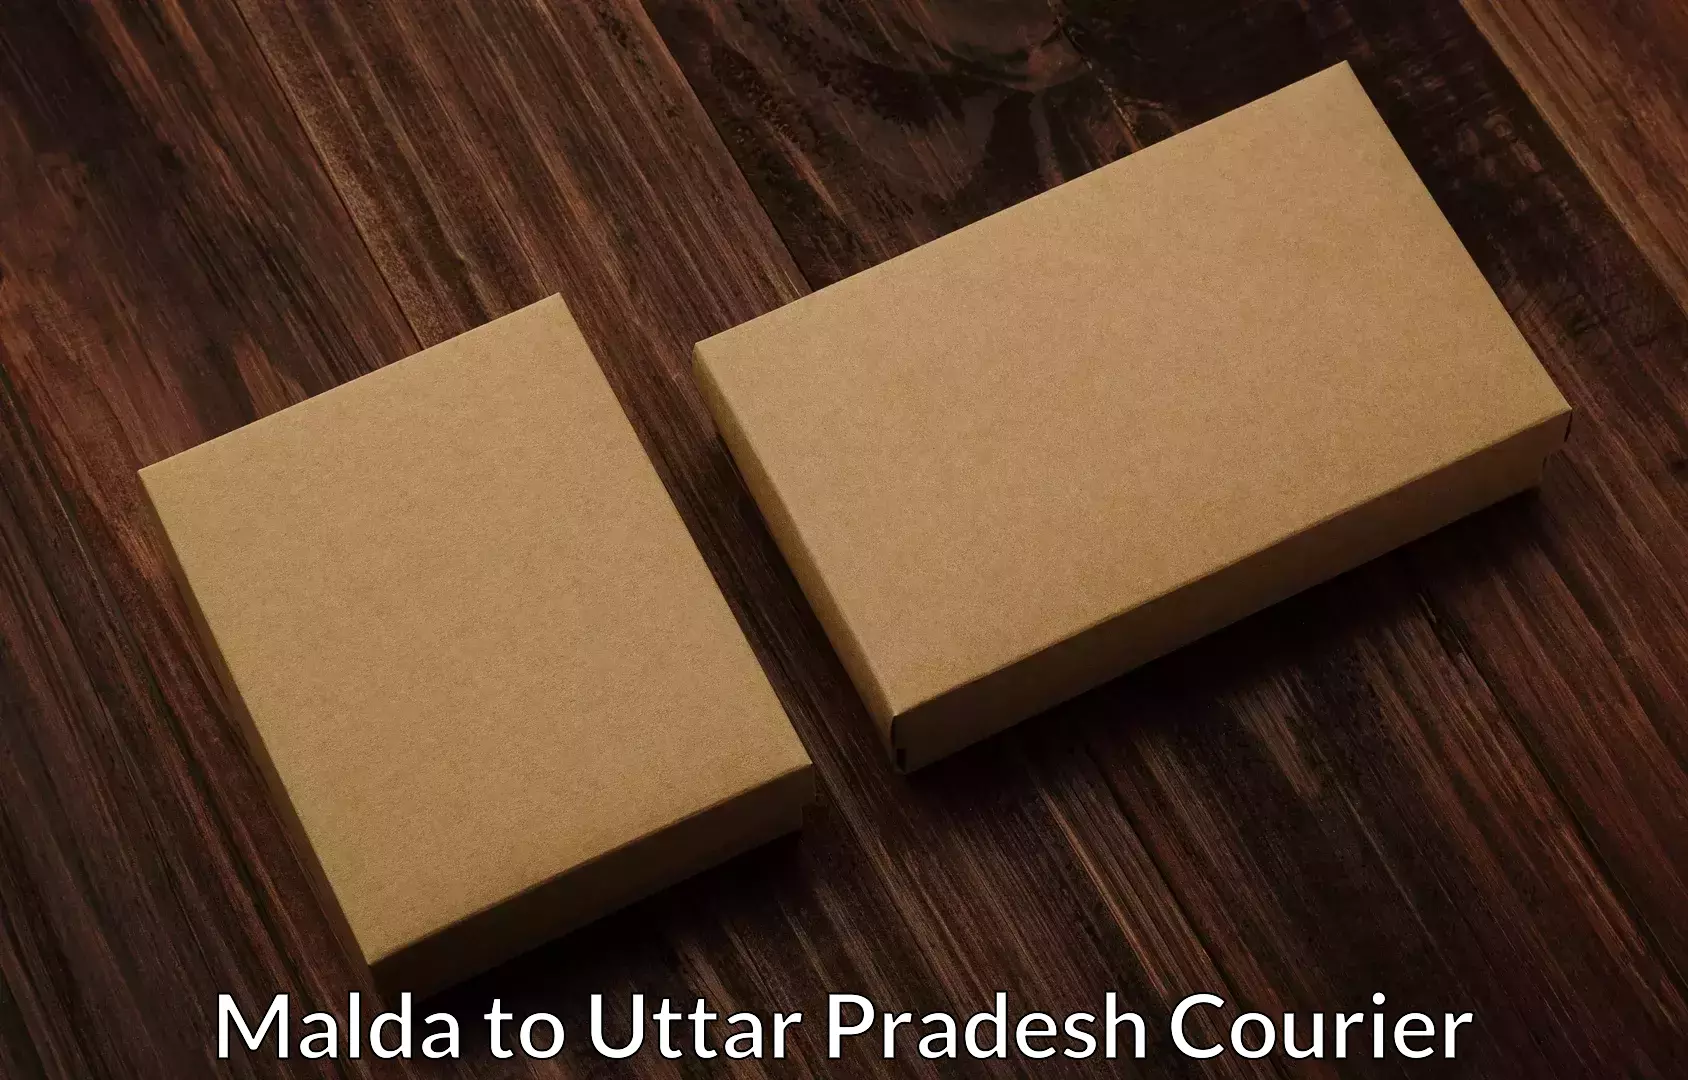 Efficient packing and moving Malda to Allahabad